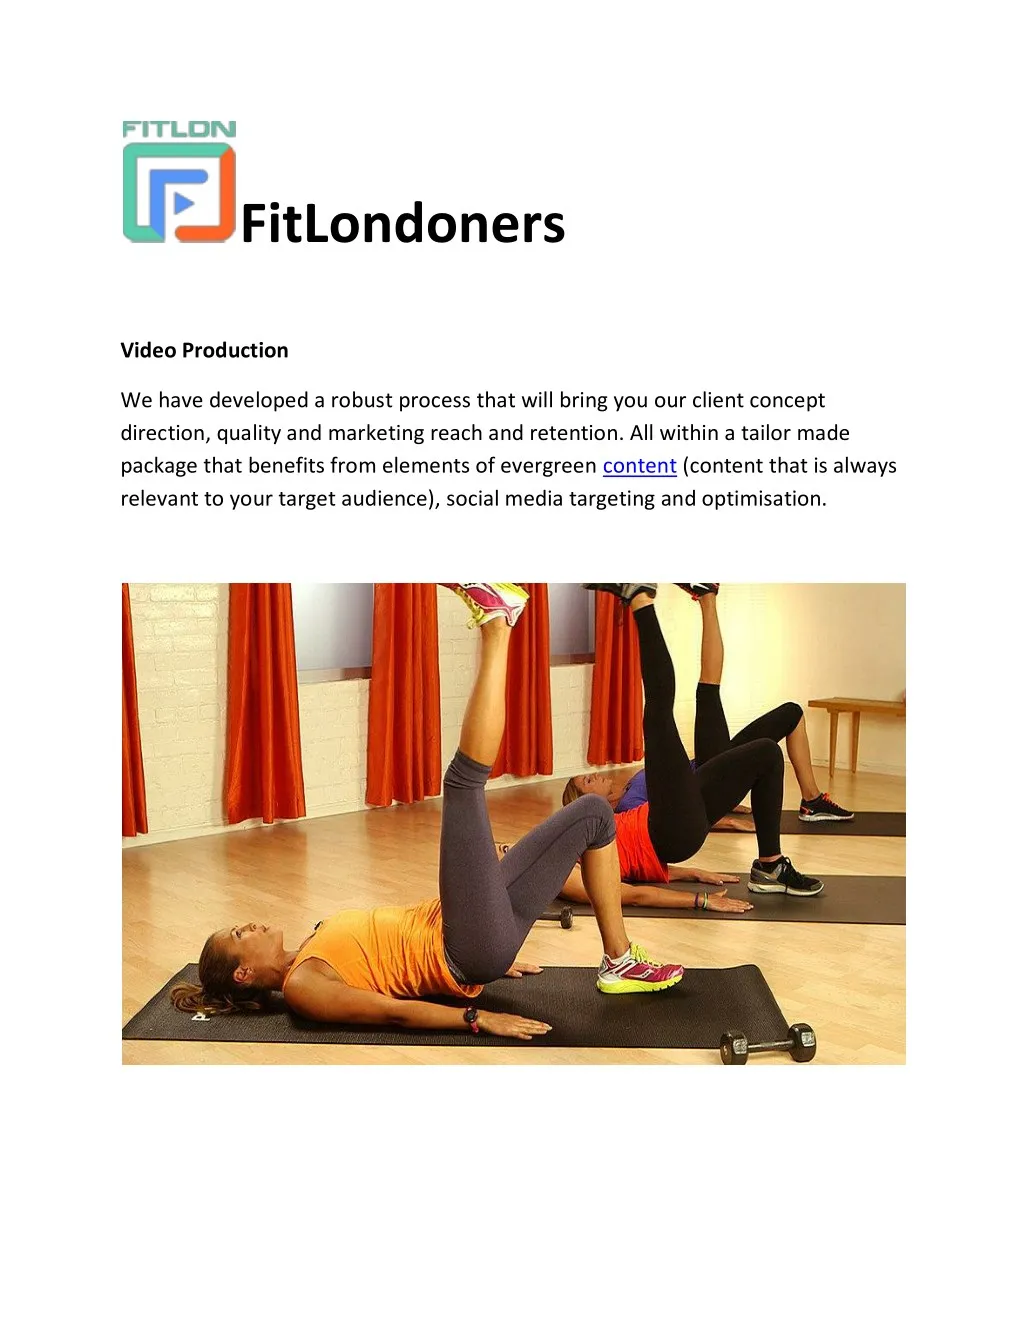 fitlondoners